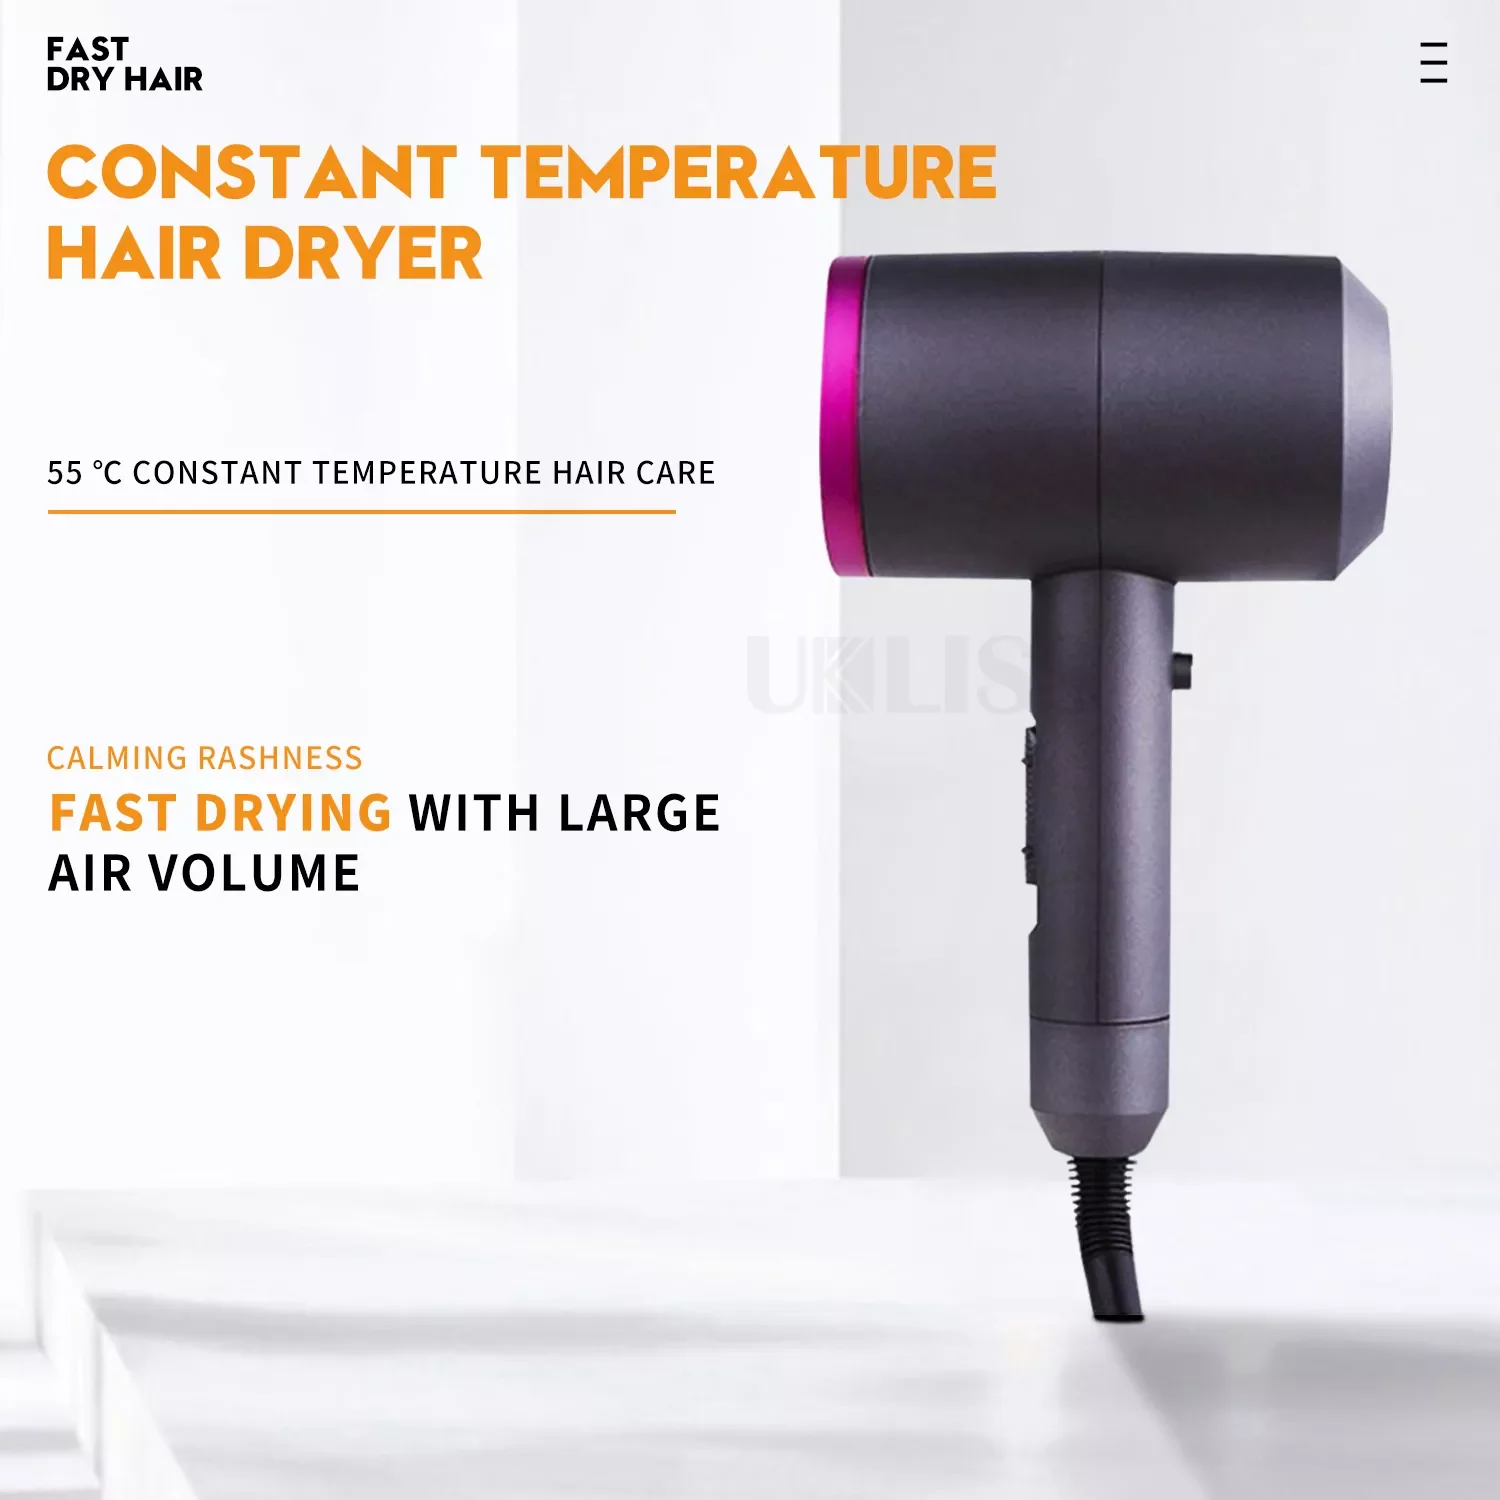 Negative Ion Hair Dryer Professional Salon Ionic Blow Dryer with Diffuser & Concentrator Ceramic Powerful Fast Drying Hairdr enlarge